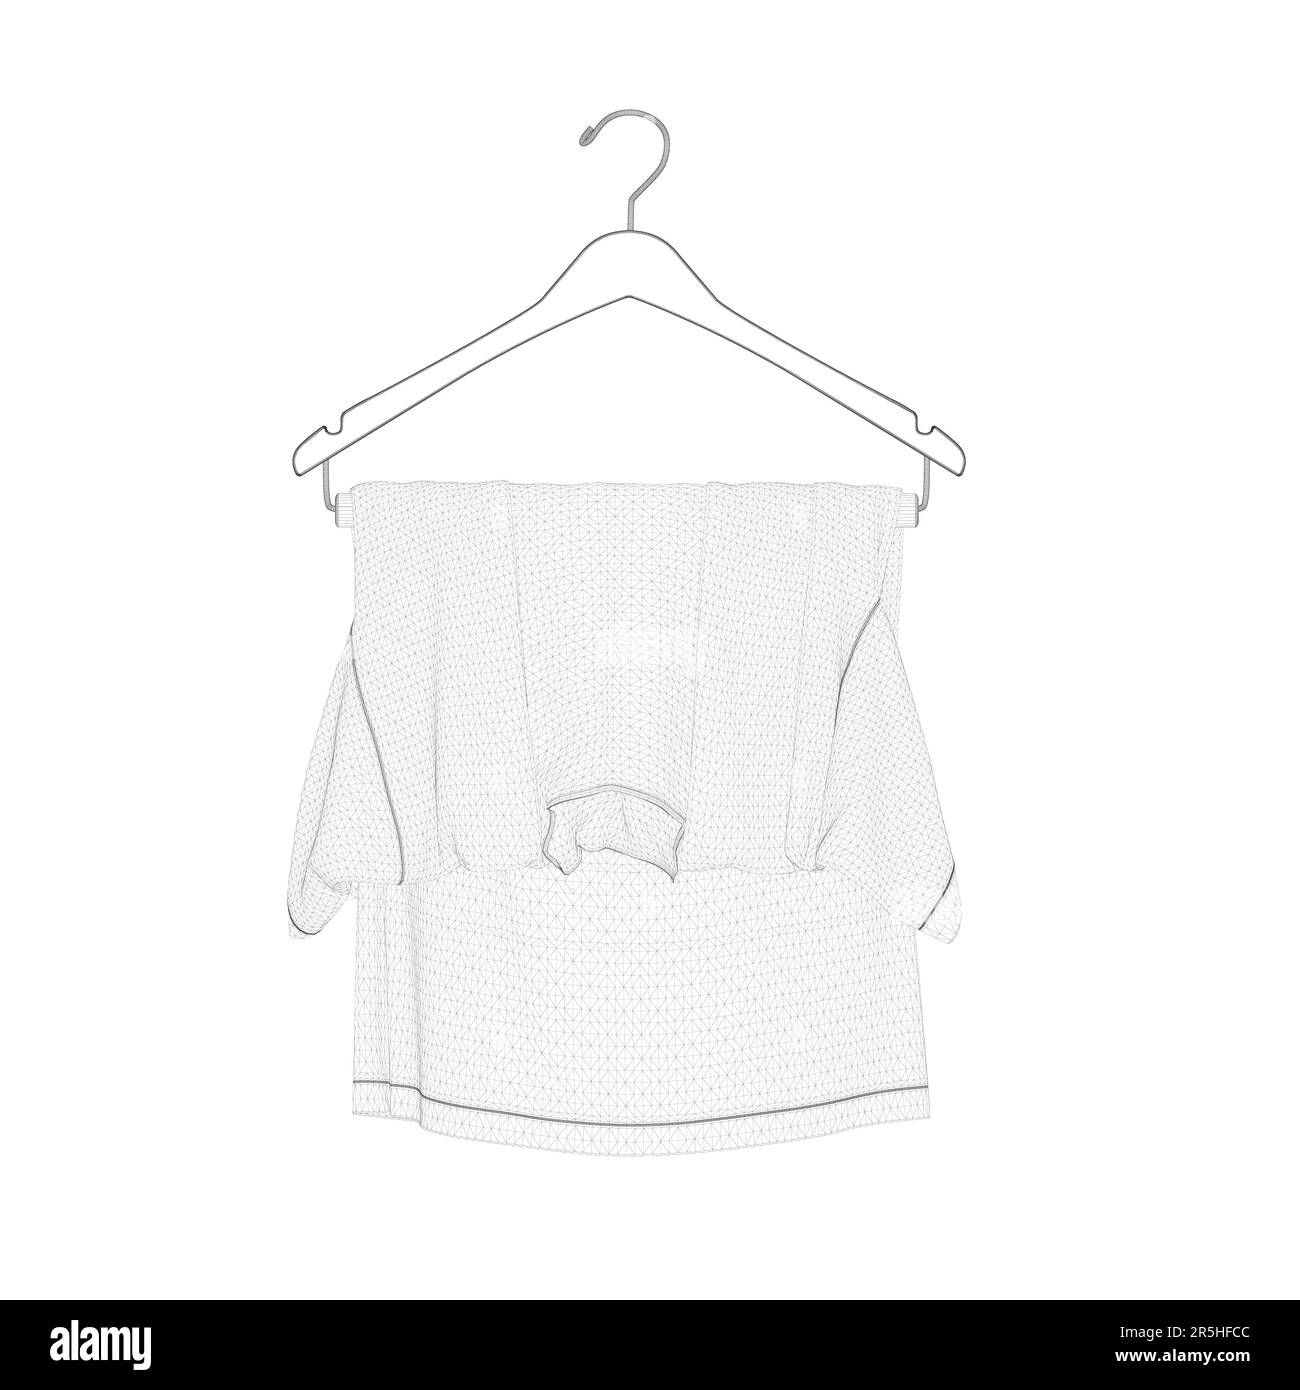 Wireframe of a T-shirt hanging on a hanger from black lines isolated on ...